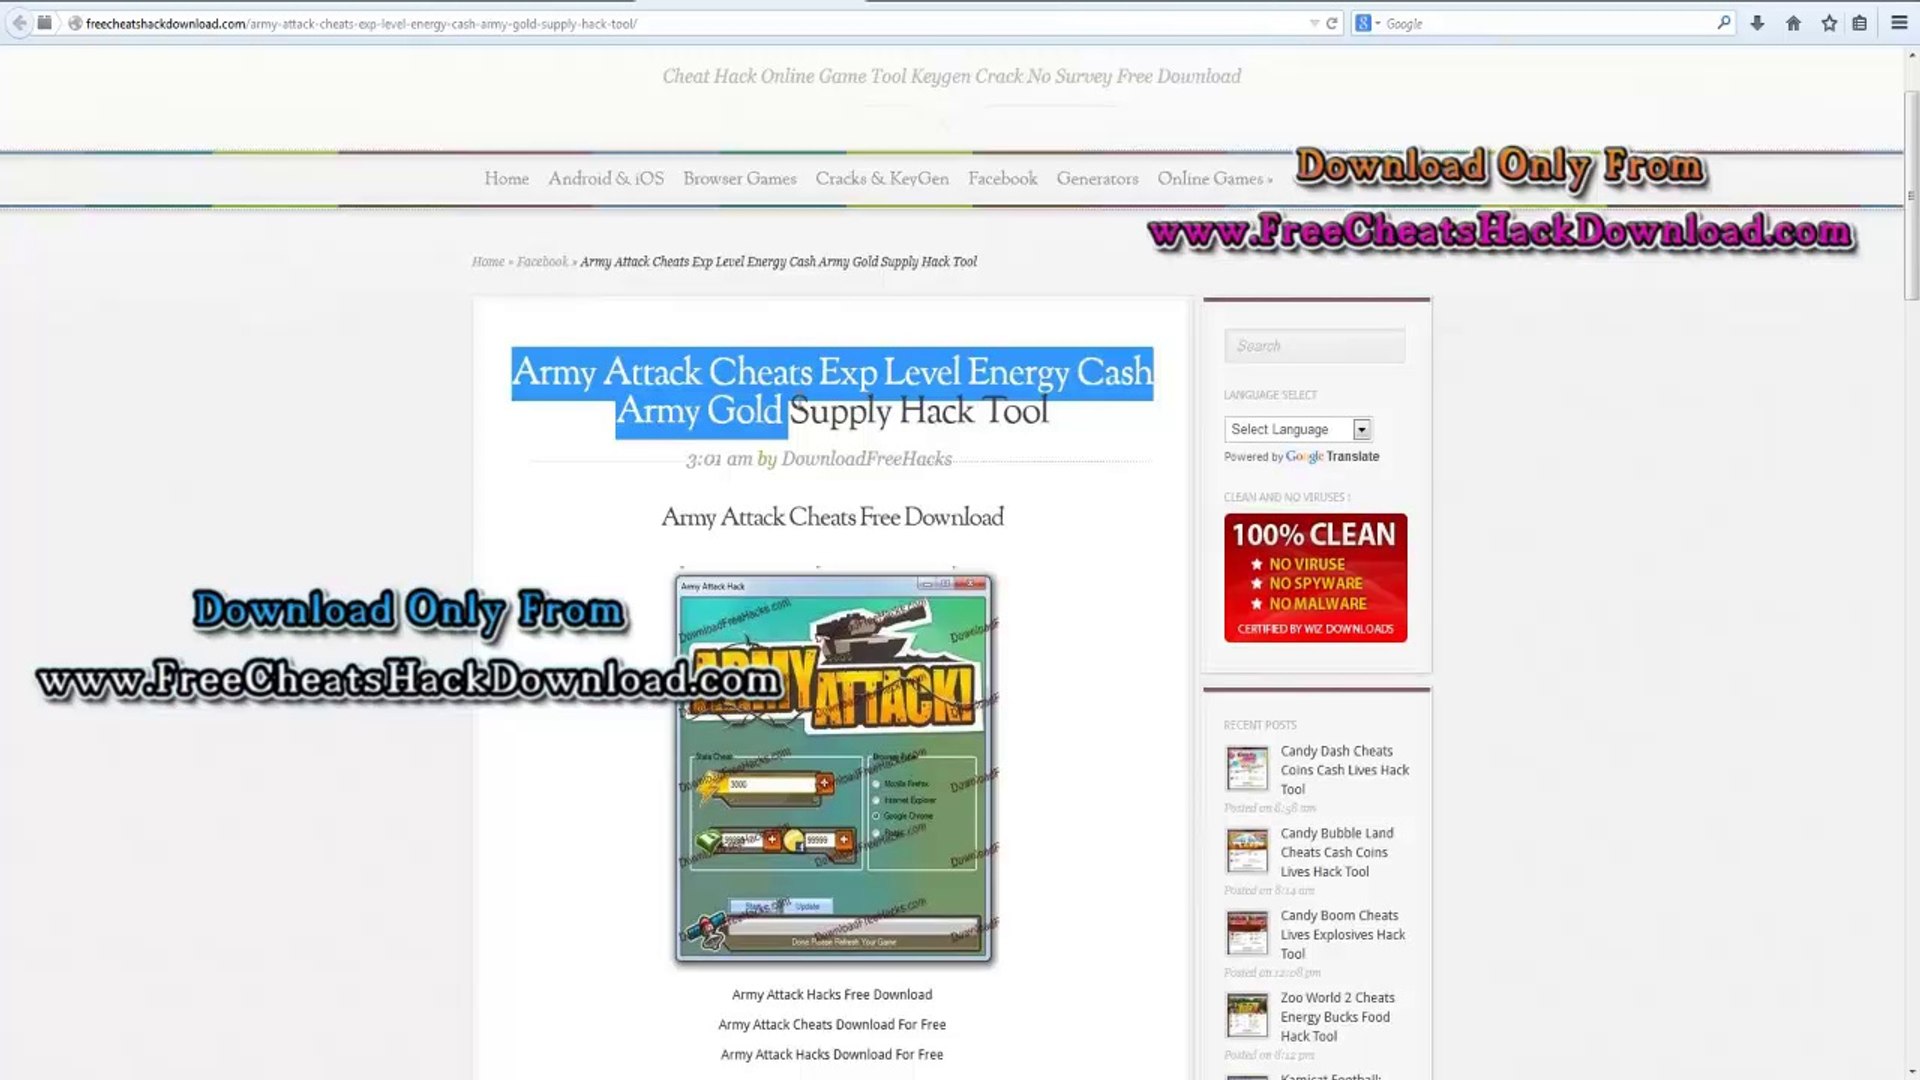 Army Attack Cheats Cash Gold Hack Tool 2014 Update Video